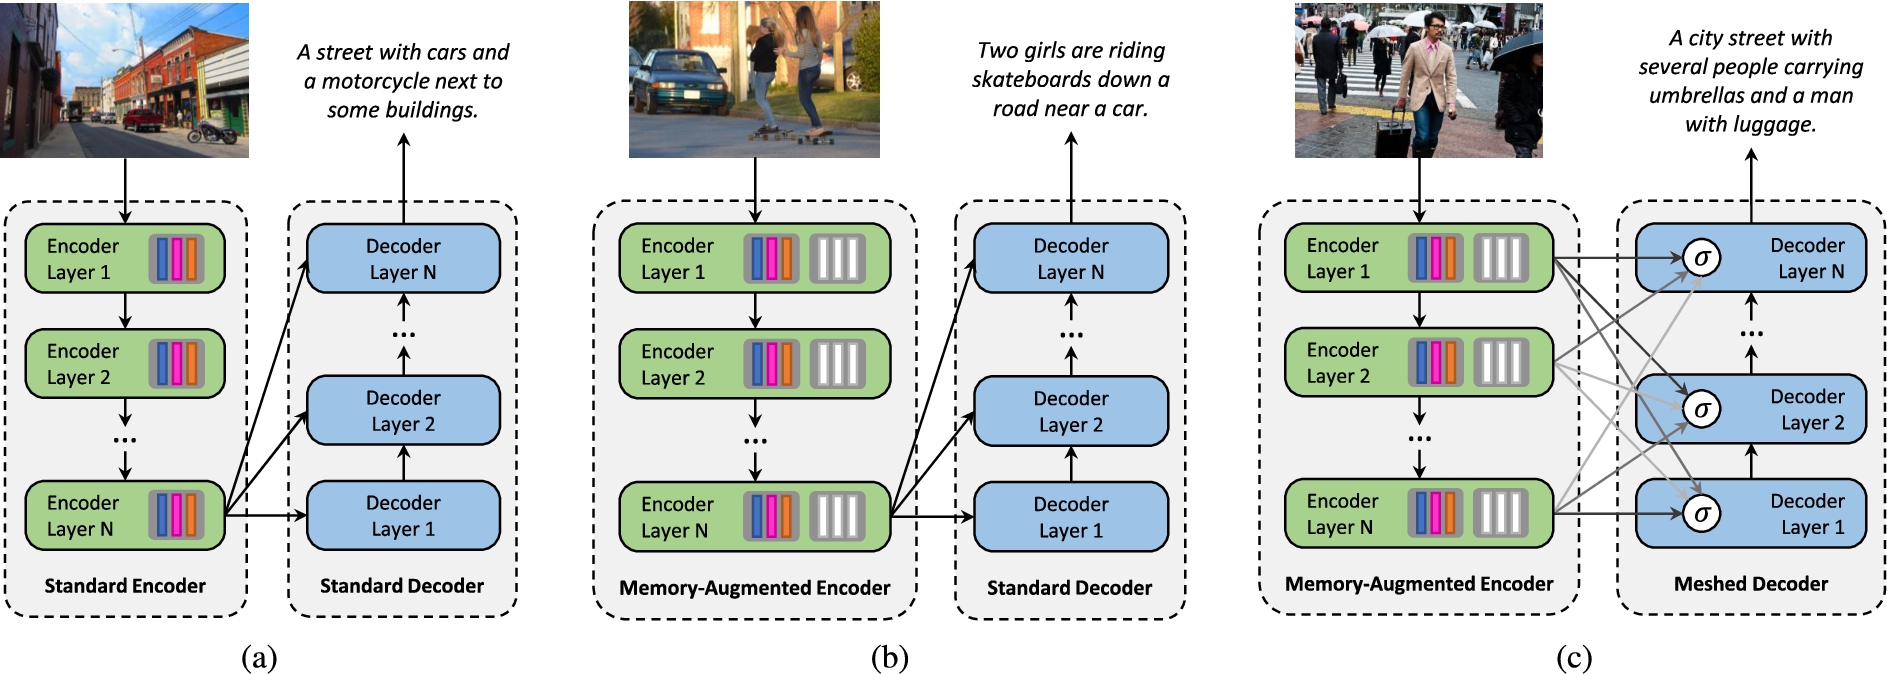 Structure of the image captioning models considered in our analysis: (a) a standard fully-attentive encoder-decoder captioner; (b) an encoder with additional memory slots to encode a-priori information; (c) a decoder with meshed connectivity which weights contributions from all encoder layers.